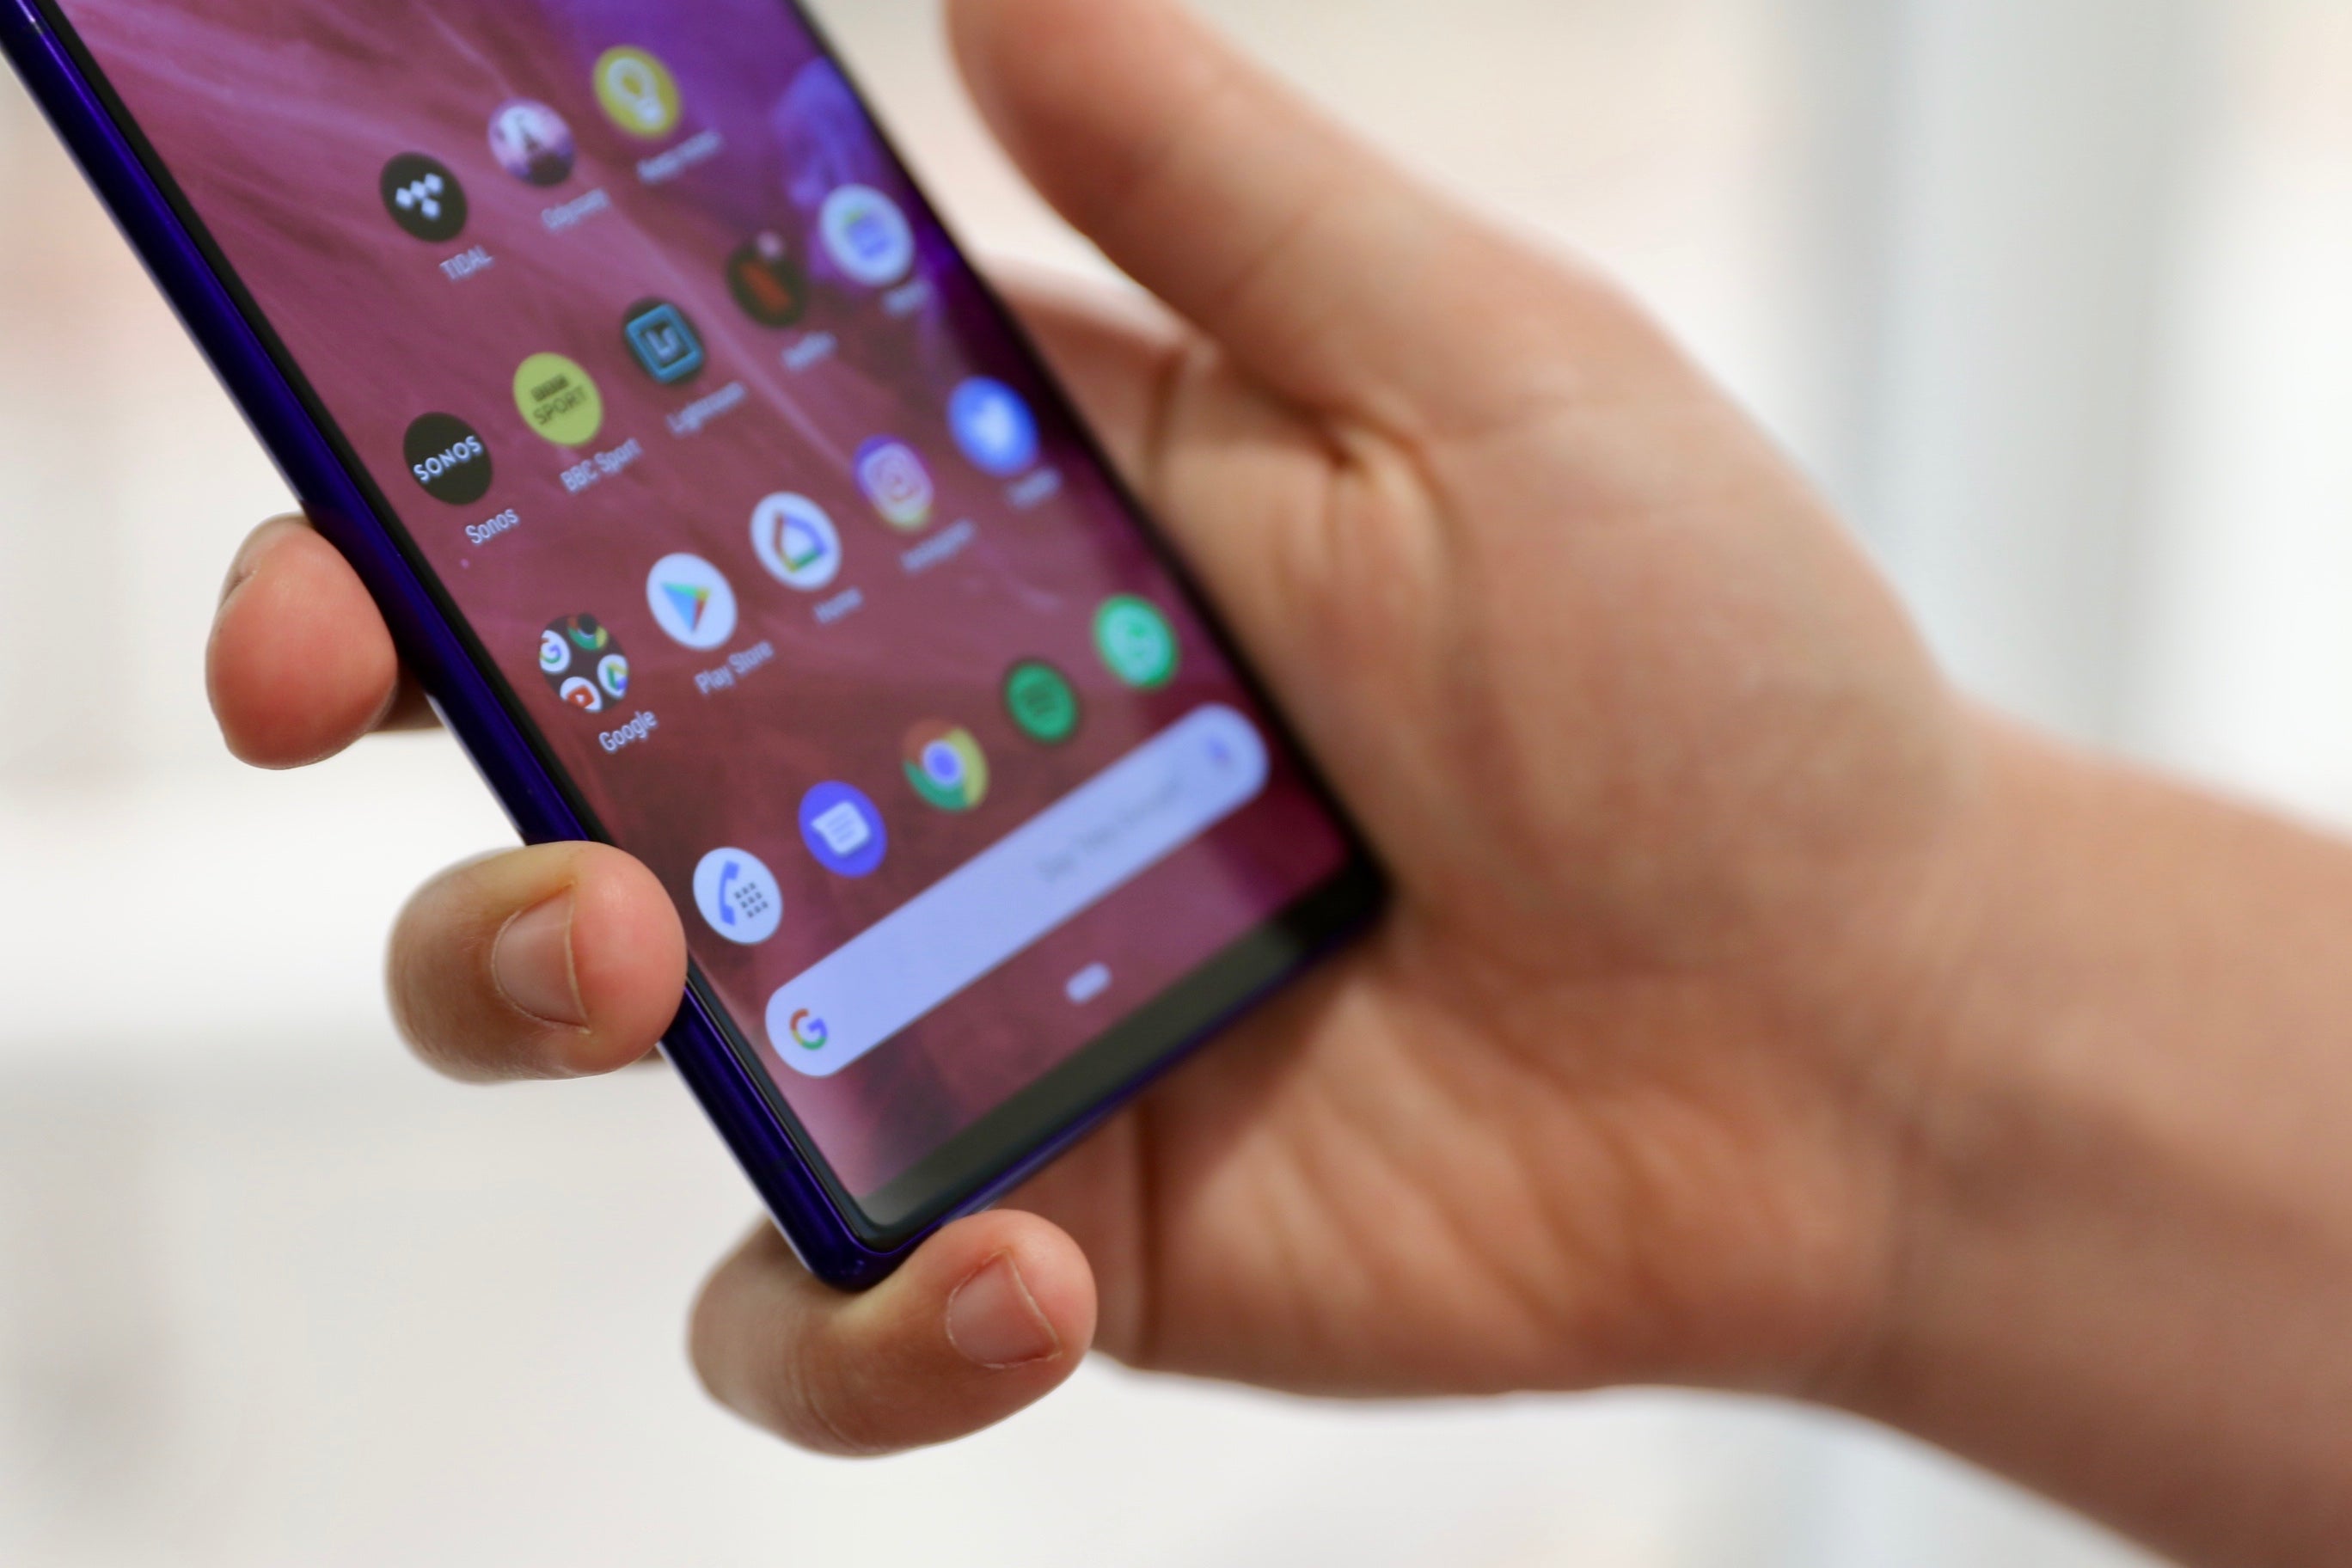 The Sony Xperia 1 is in poor health: There's a lot riding on the Xperia